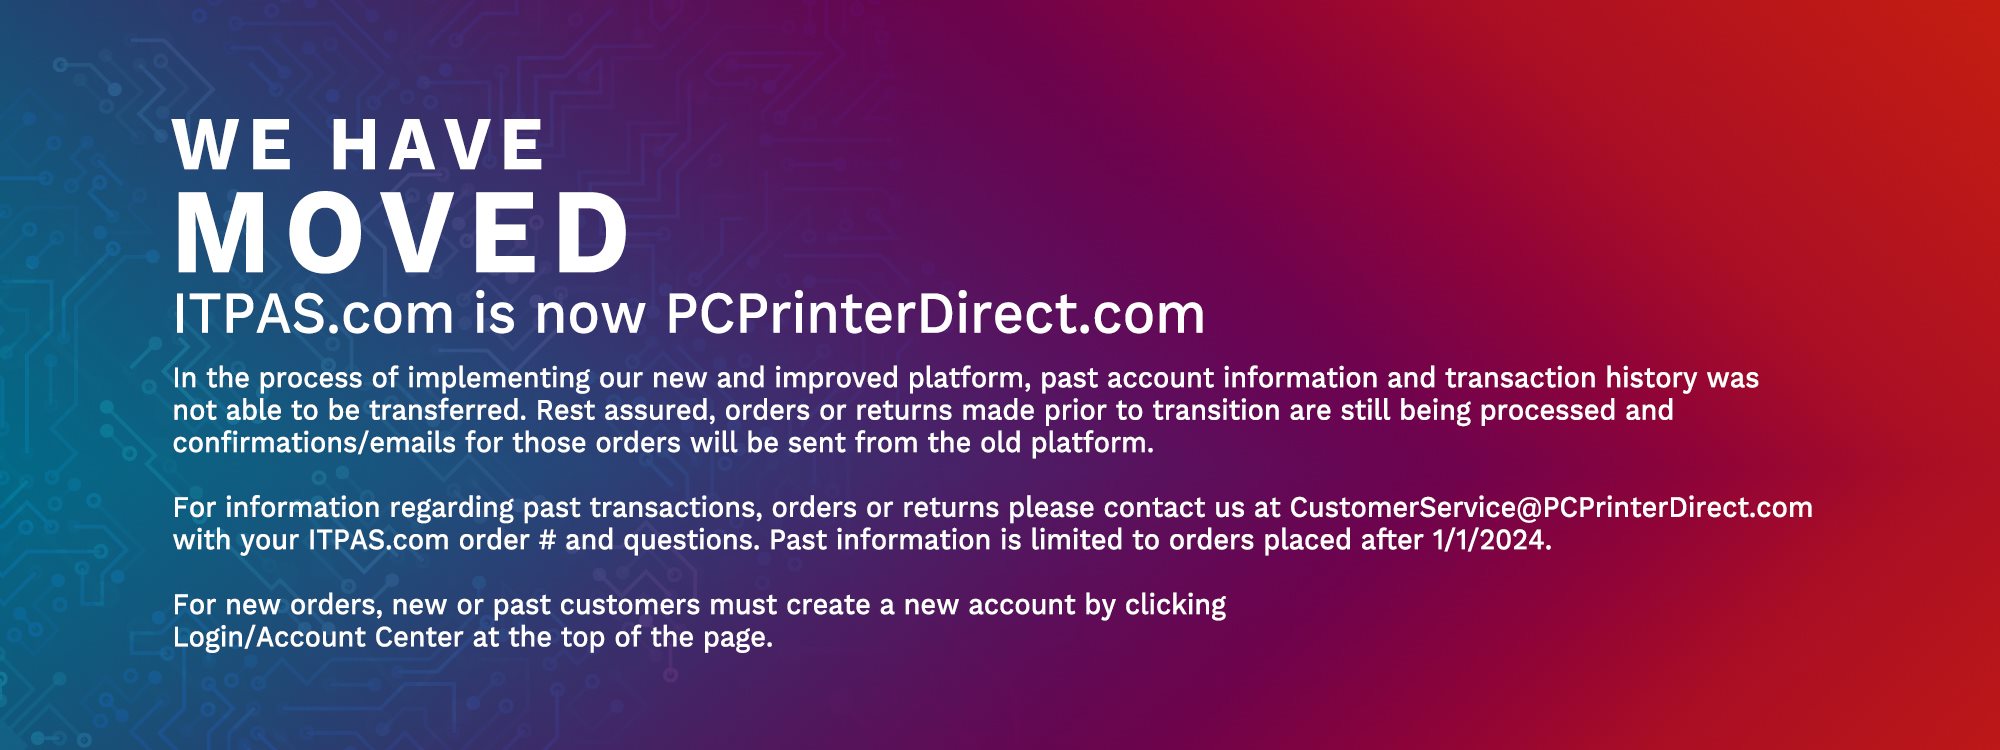 We Moved ITPAS is now PCPrinterDirect